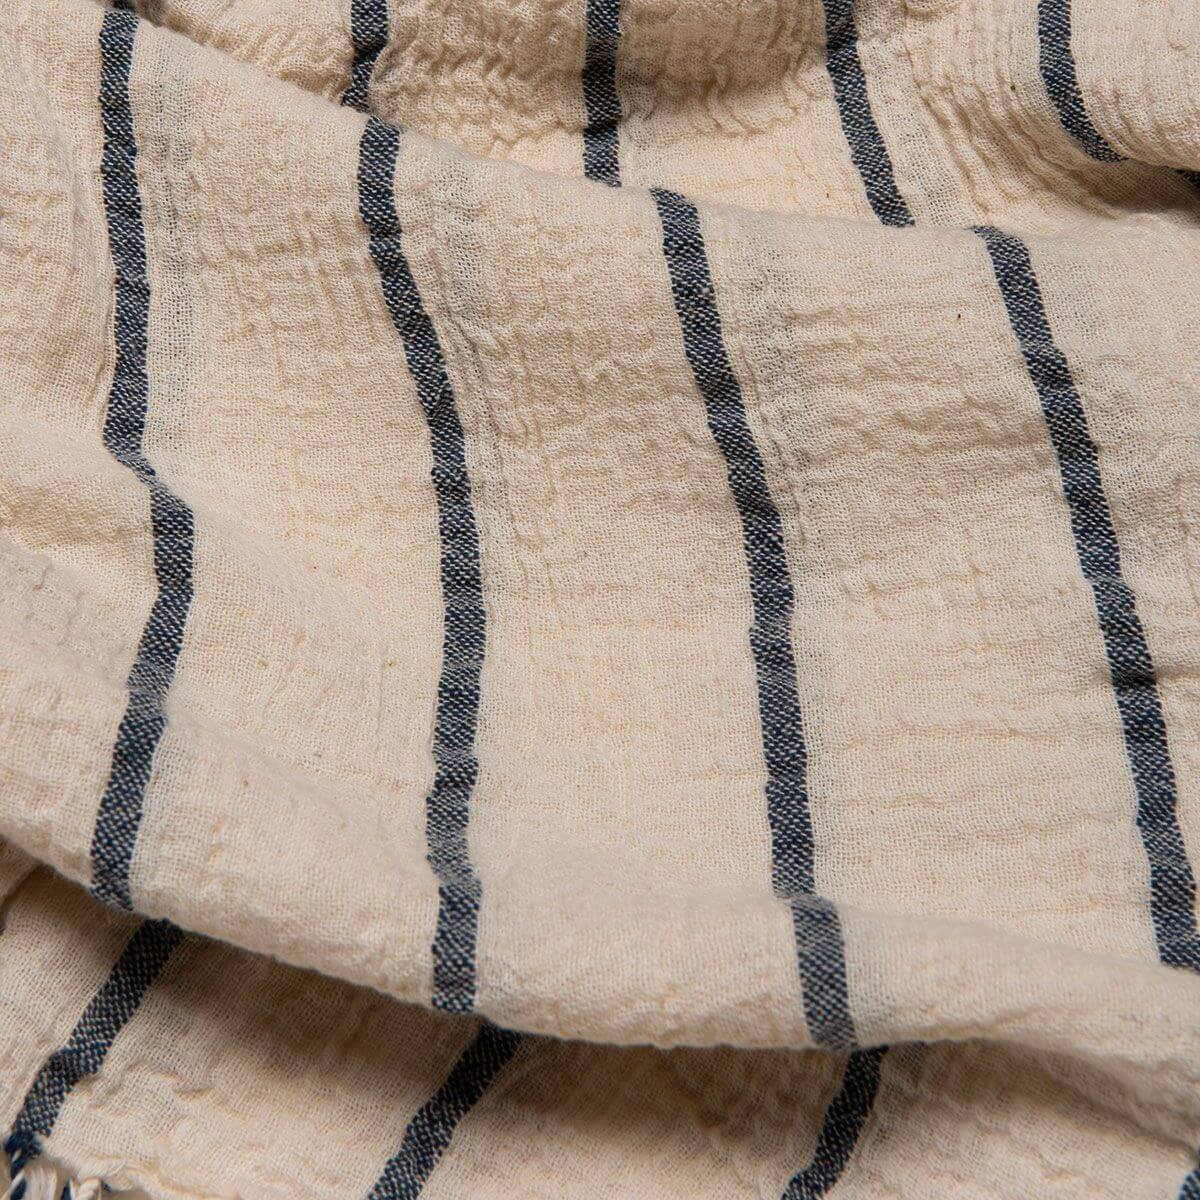 Cotton Linen Blend Turkish Towel Shawl - Turkish Towels for Beach and ...